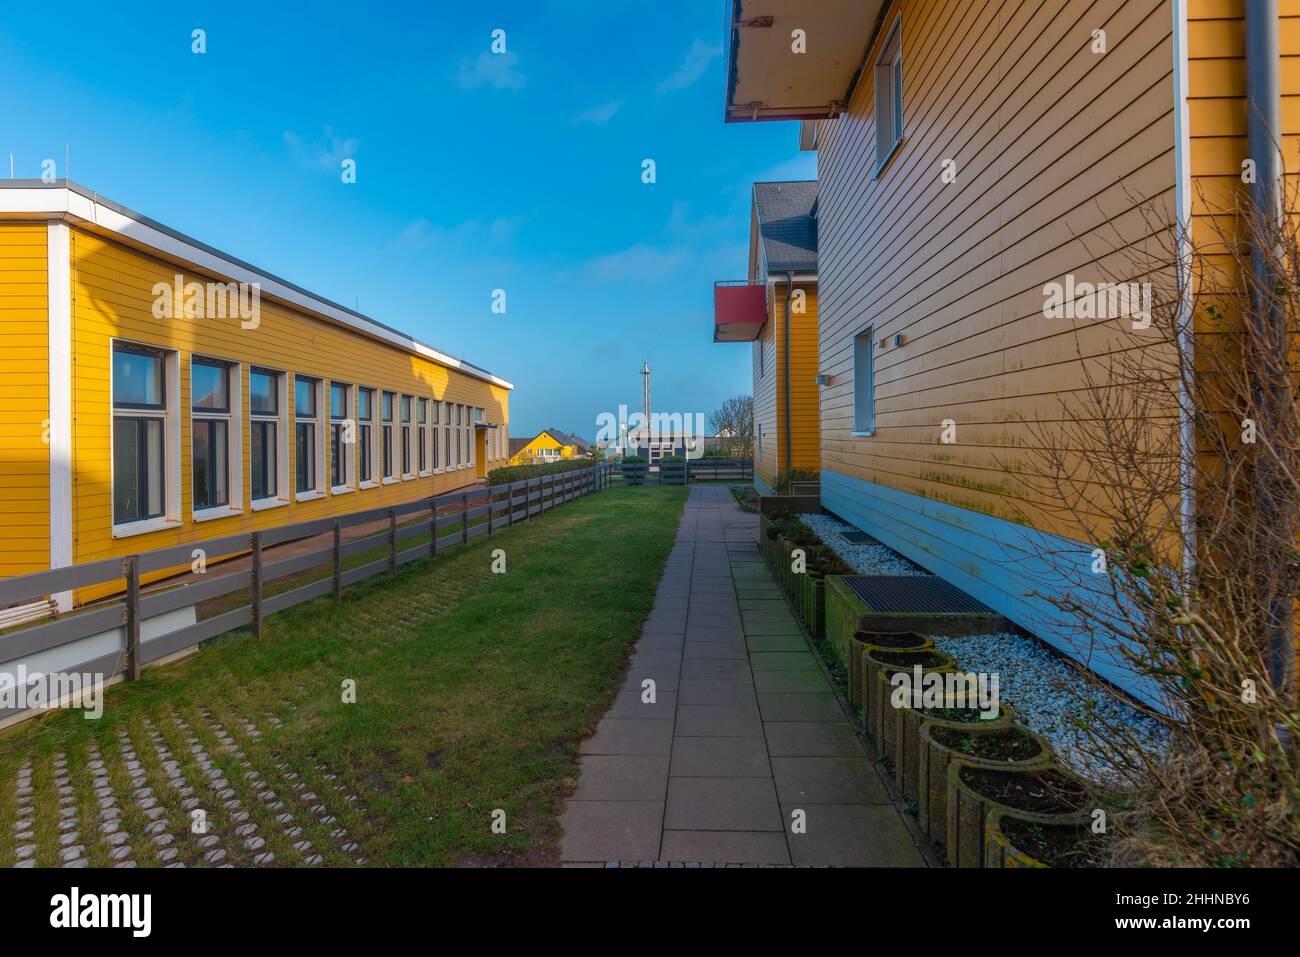 School buildings (left) and a living quarter, borth painted yellow,  architecture on the North Sea island of Heligoland, Northern Germany, Europe Stock Photo